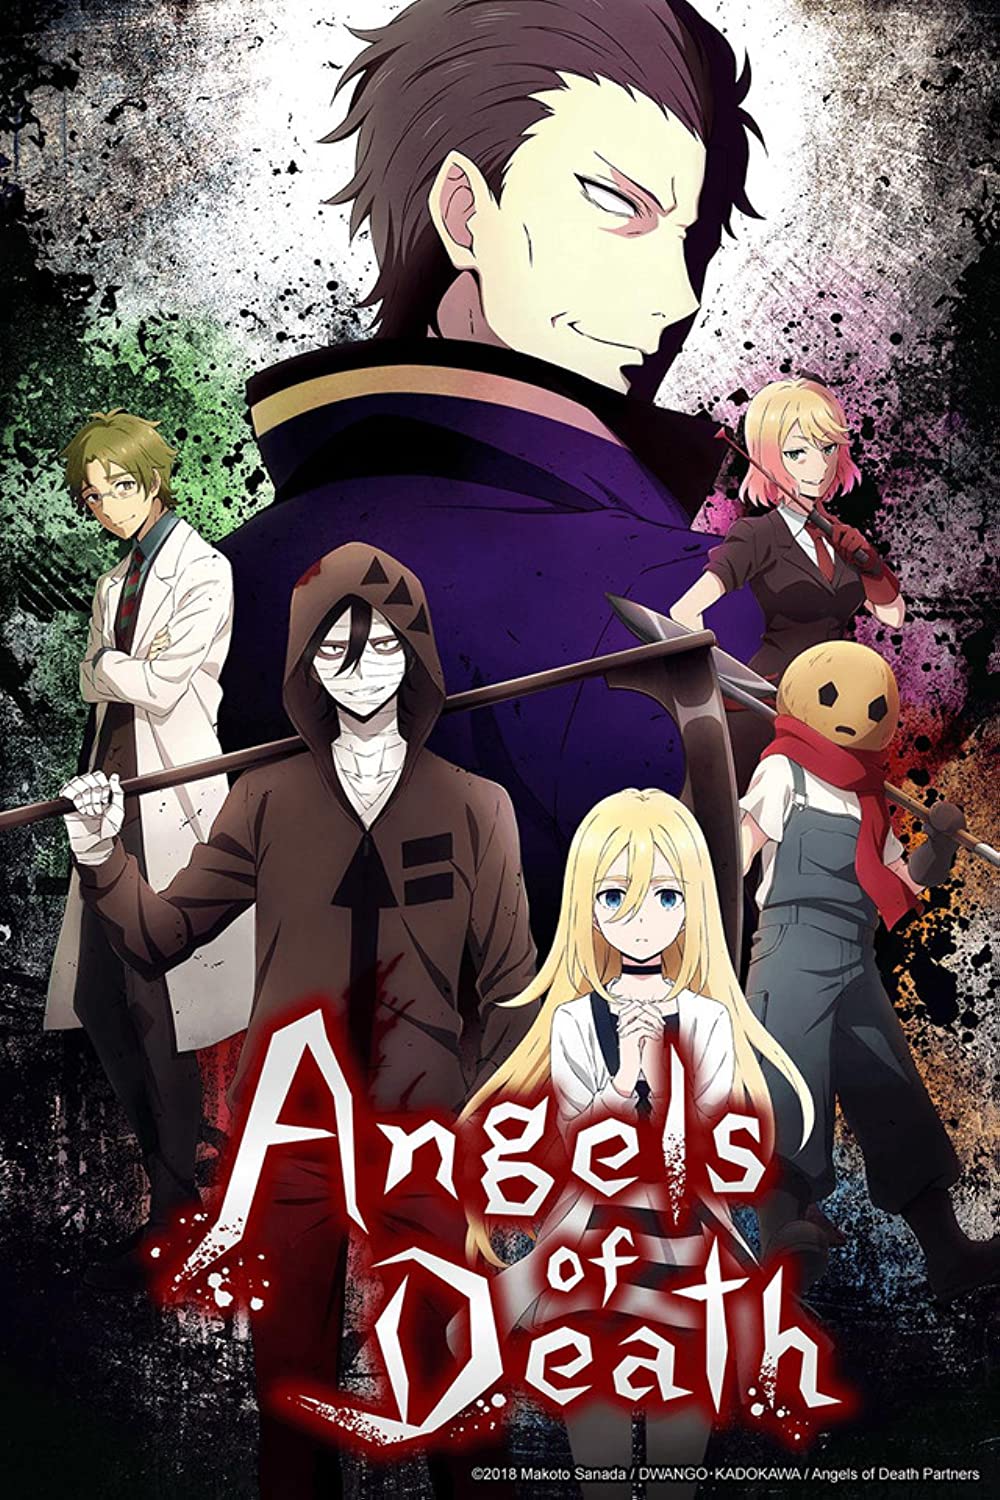 angels-of-death-anime-voice-over-wiki-fandom